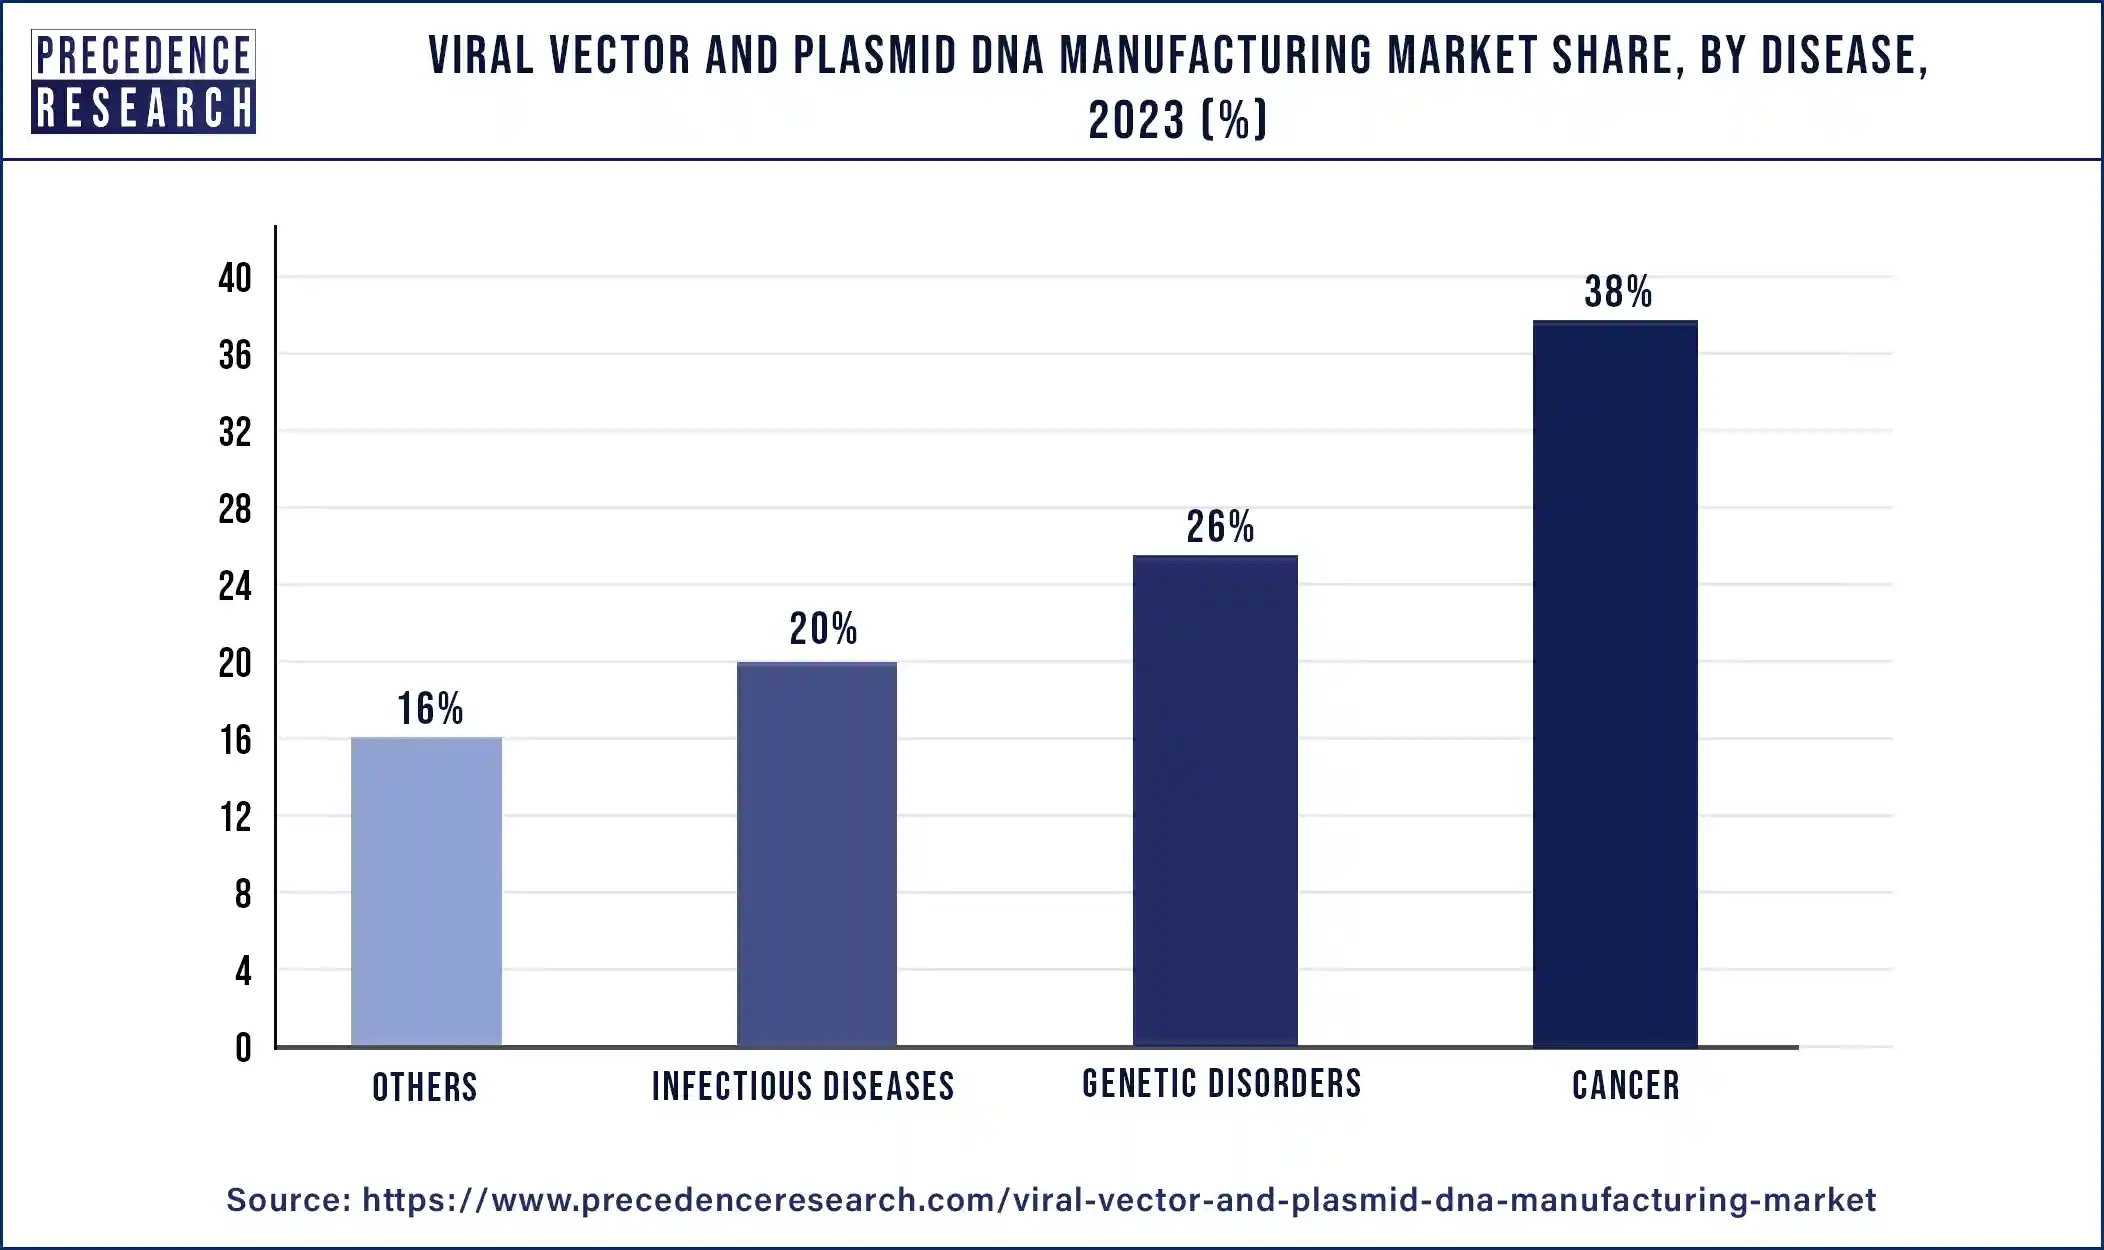 Viral Vectors and Plasmid DNA Manufacturing Market Share, By Disease, 2023 (%)